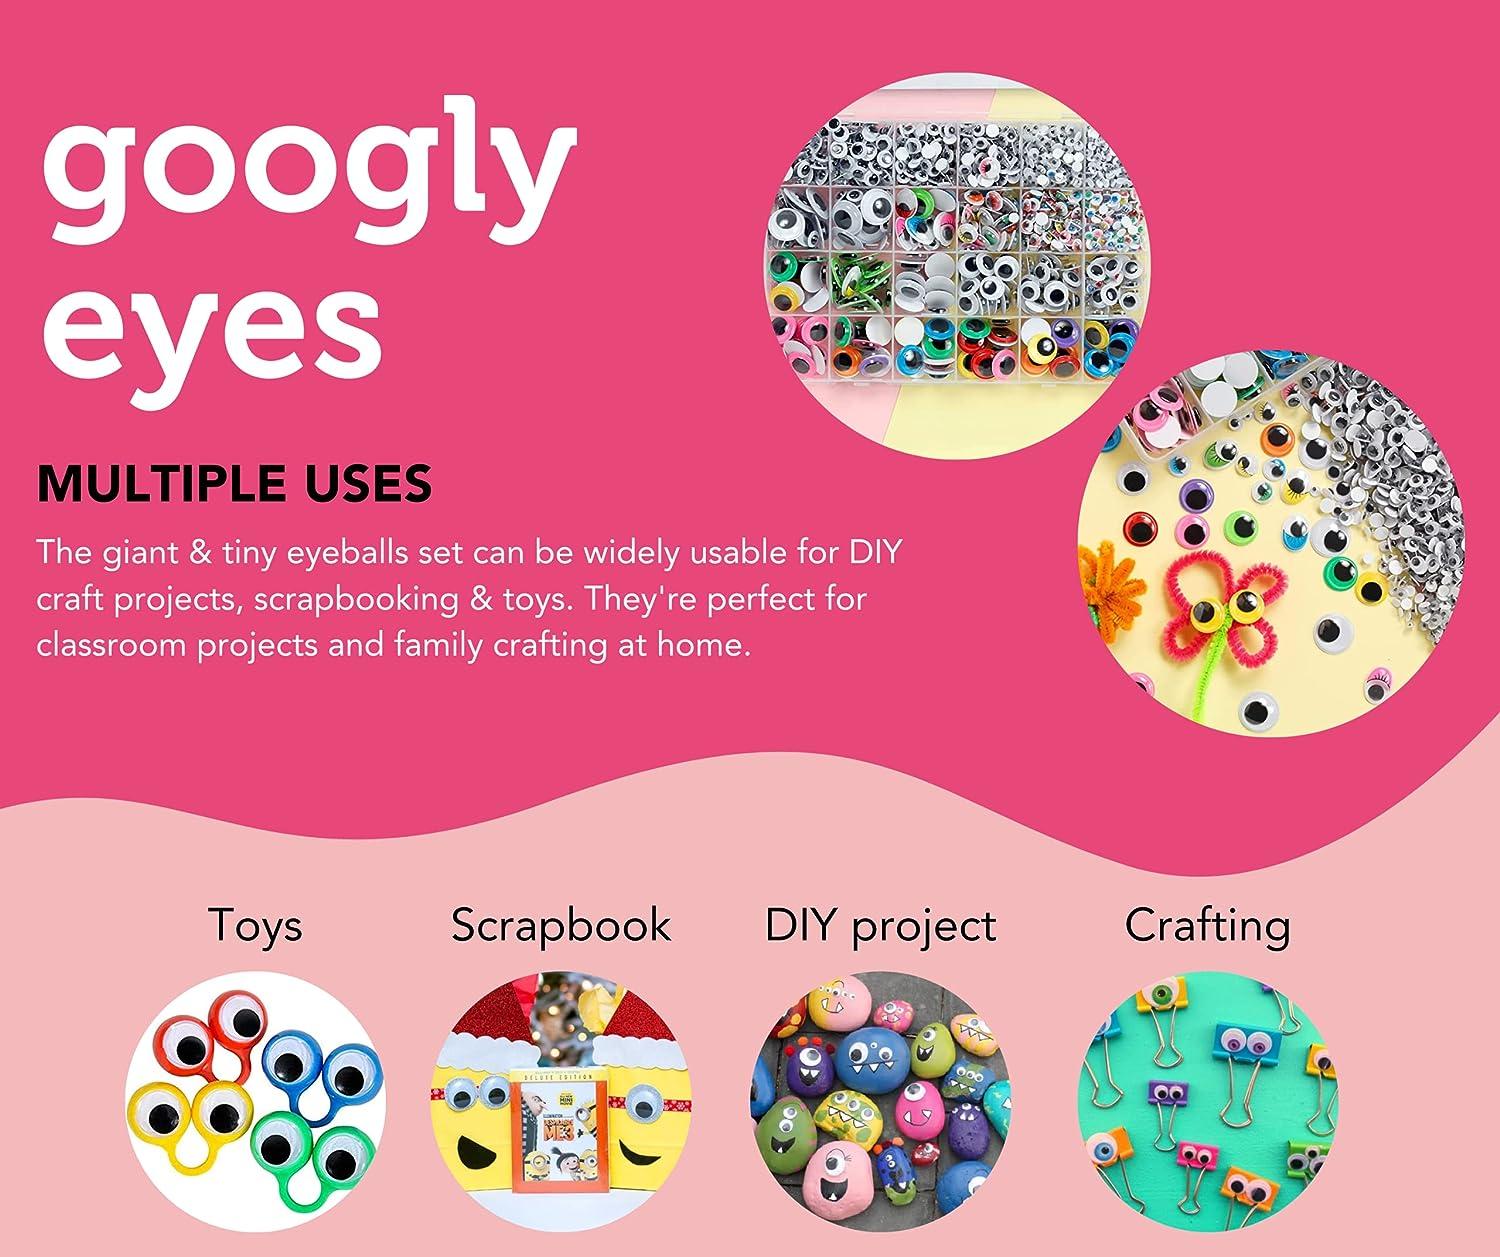 Googly Eyes Craft Projects for Kids - Organize and Decorate Everything